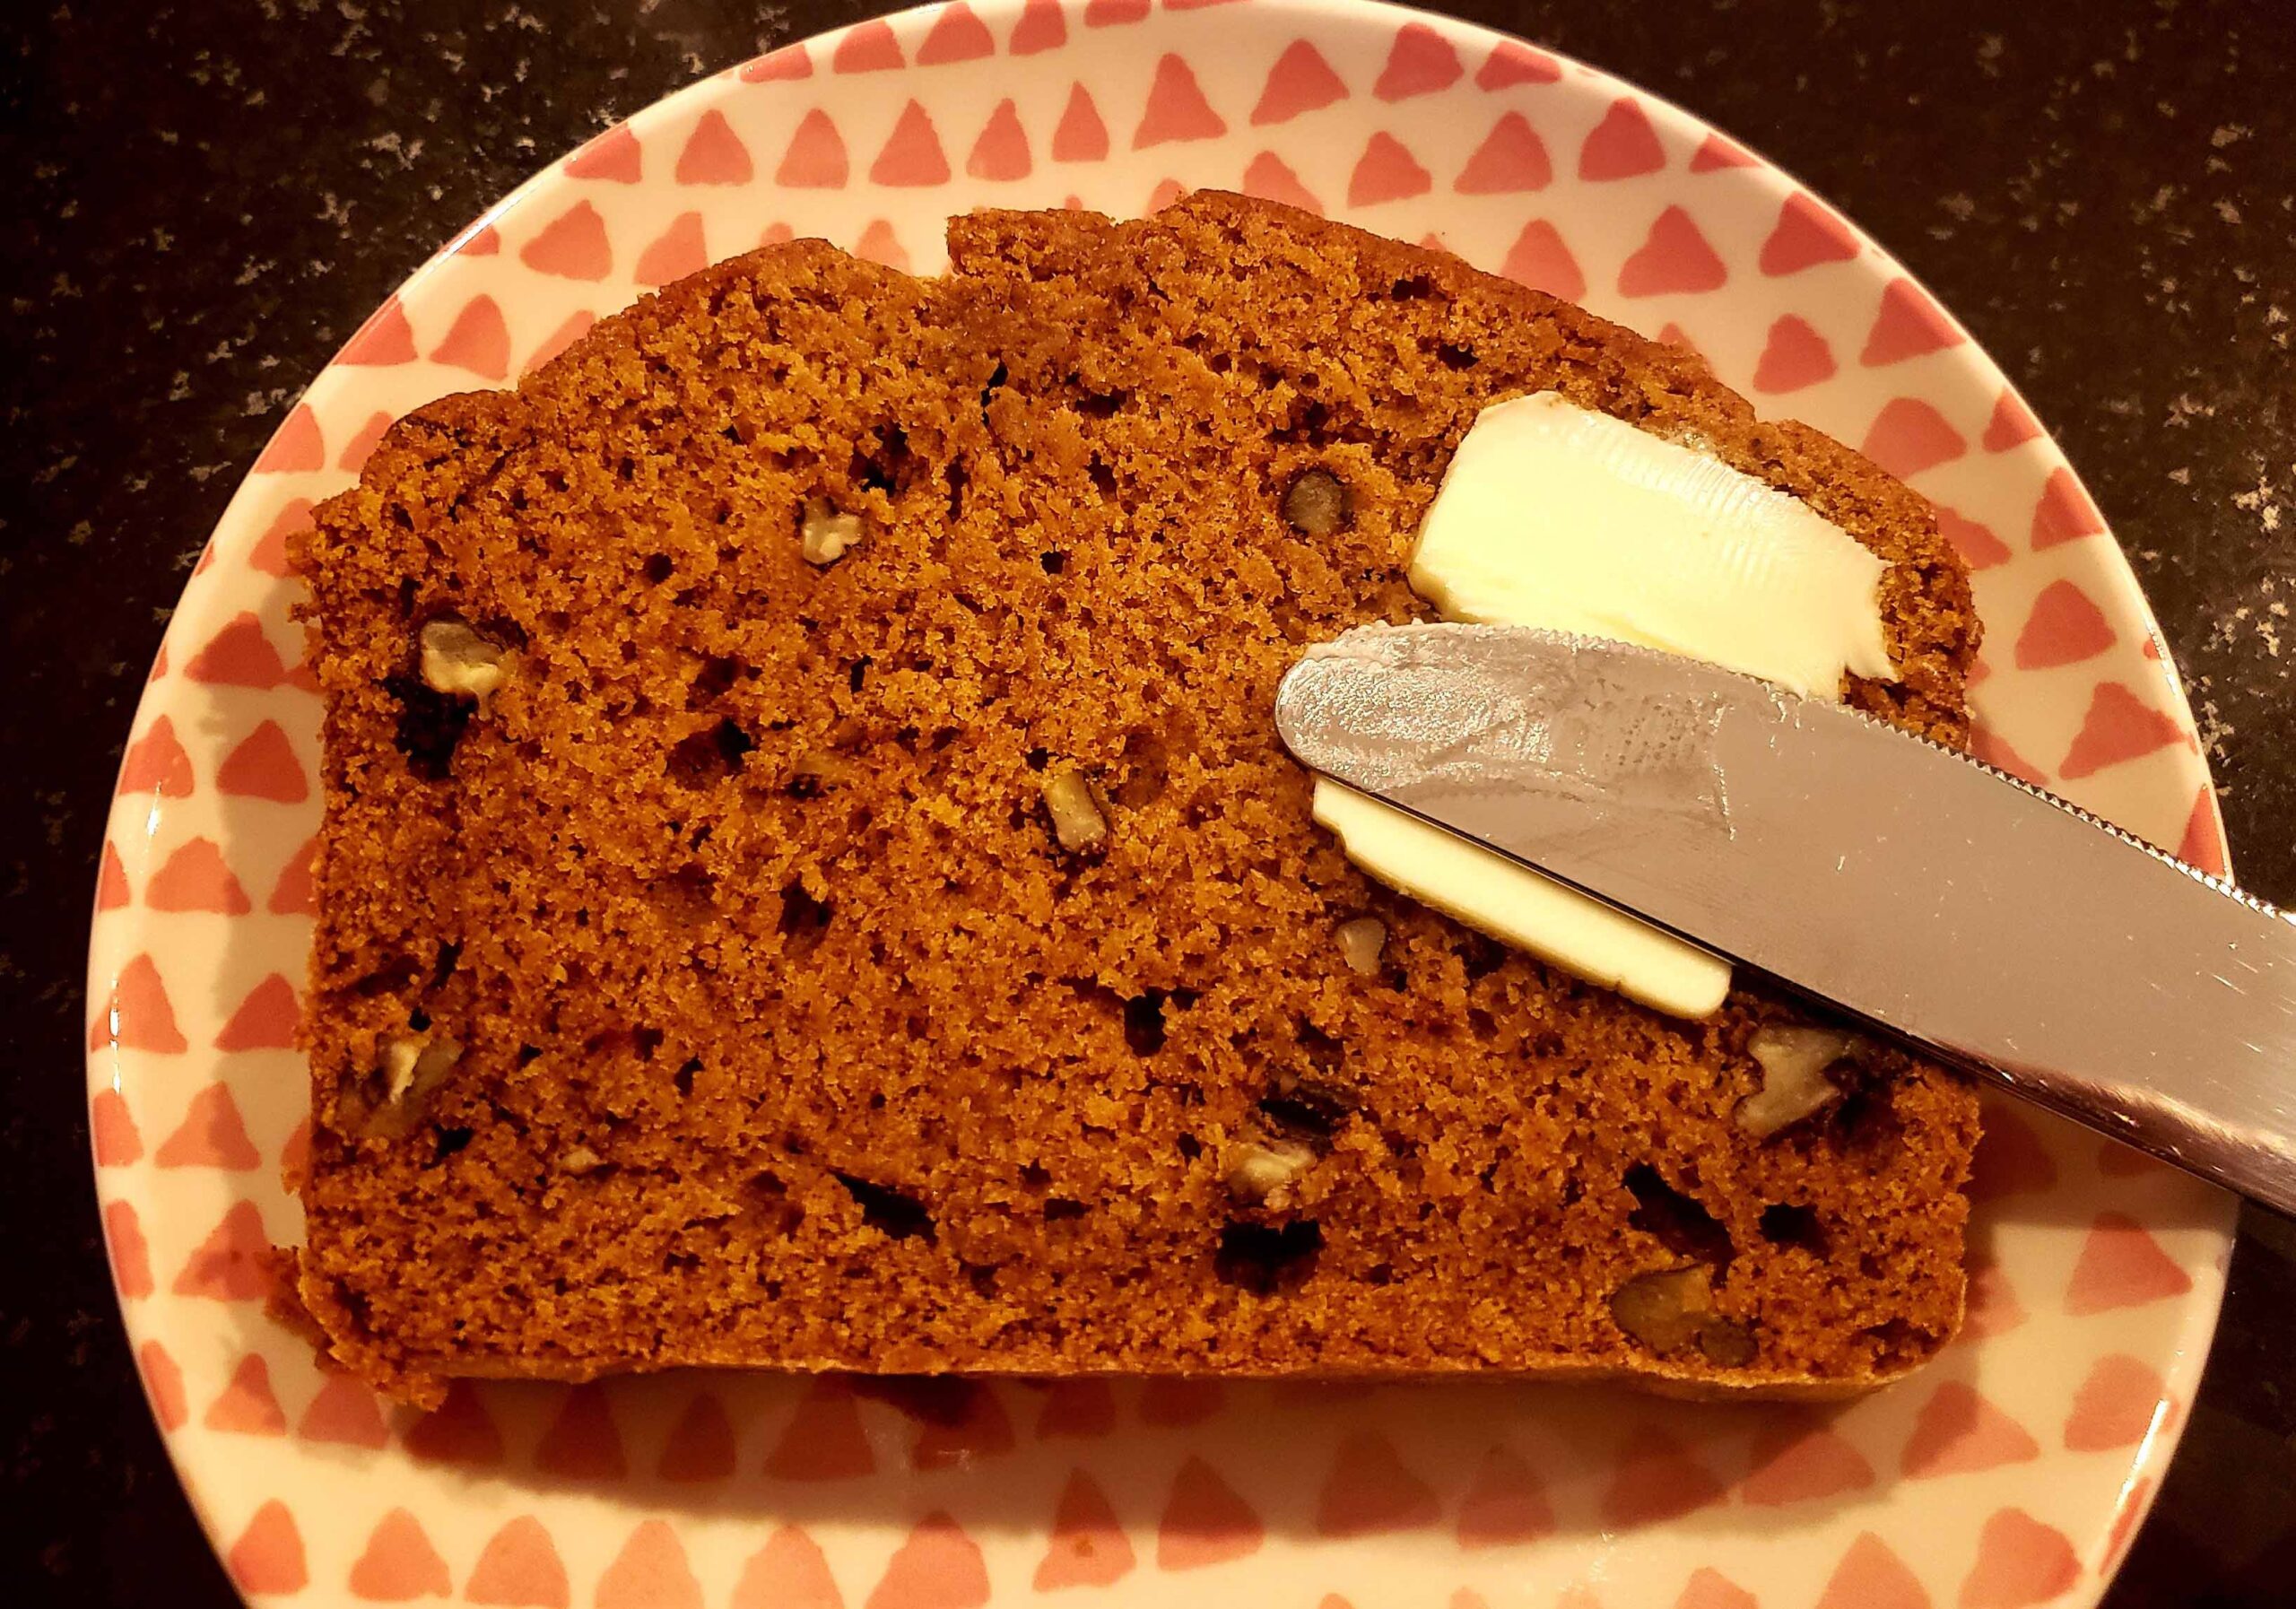 slide of pumpkin bread on red patterned plate and knife with butter smeared on